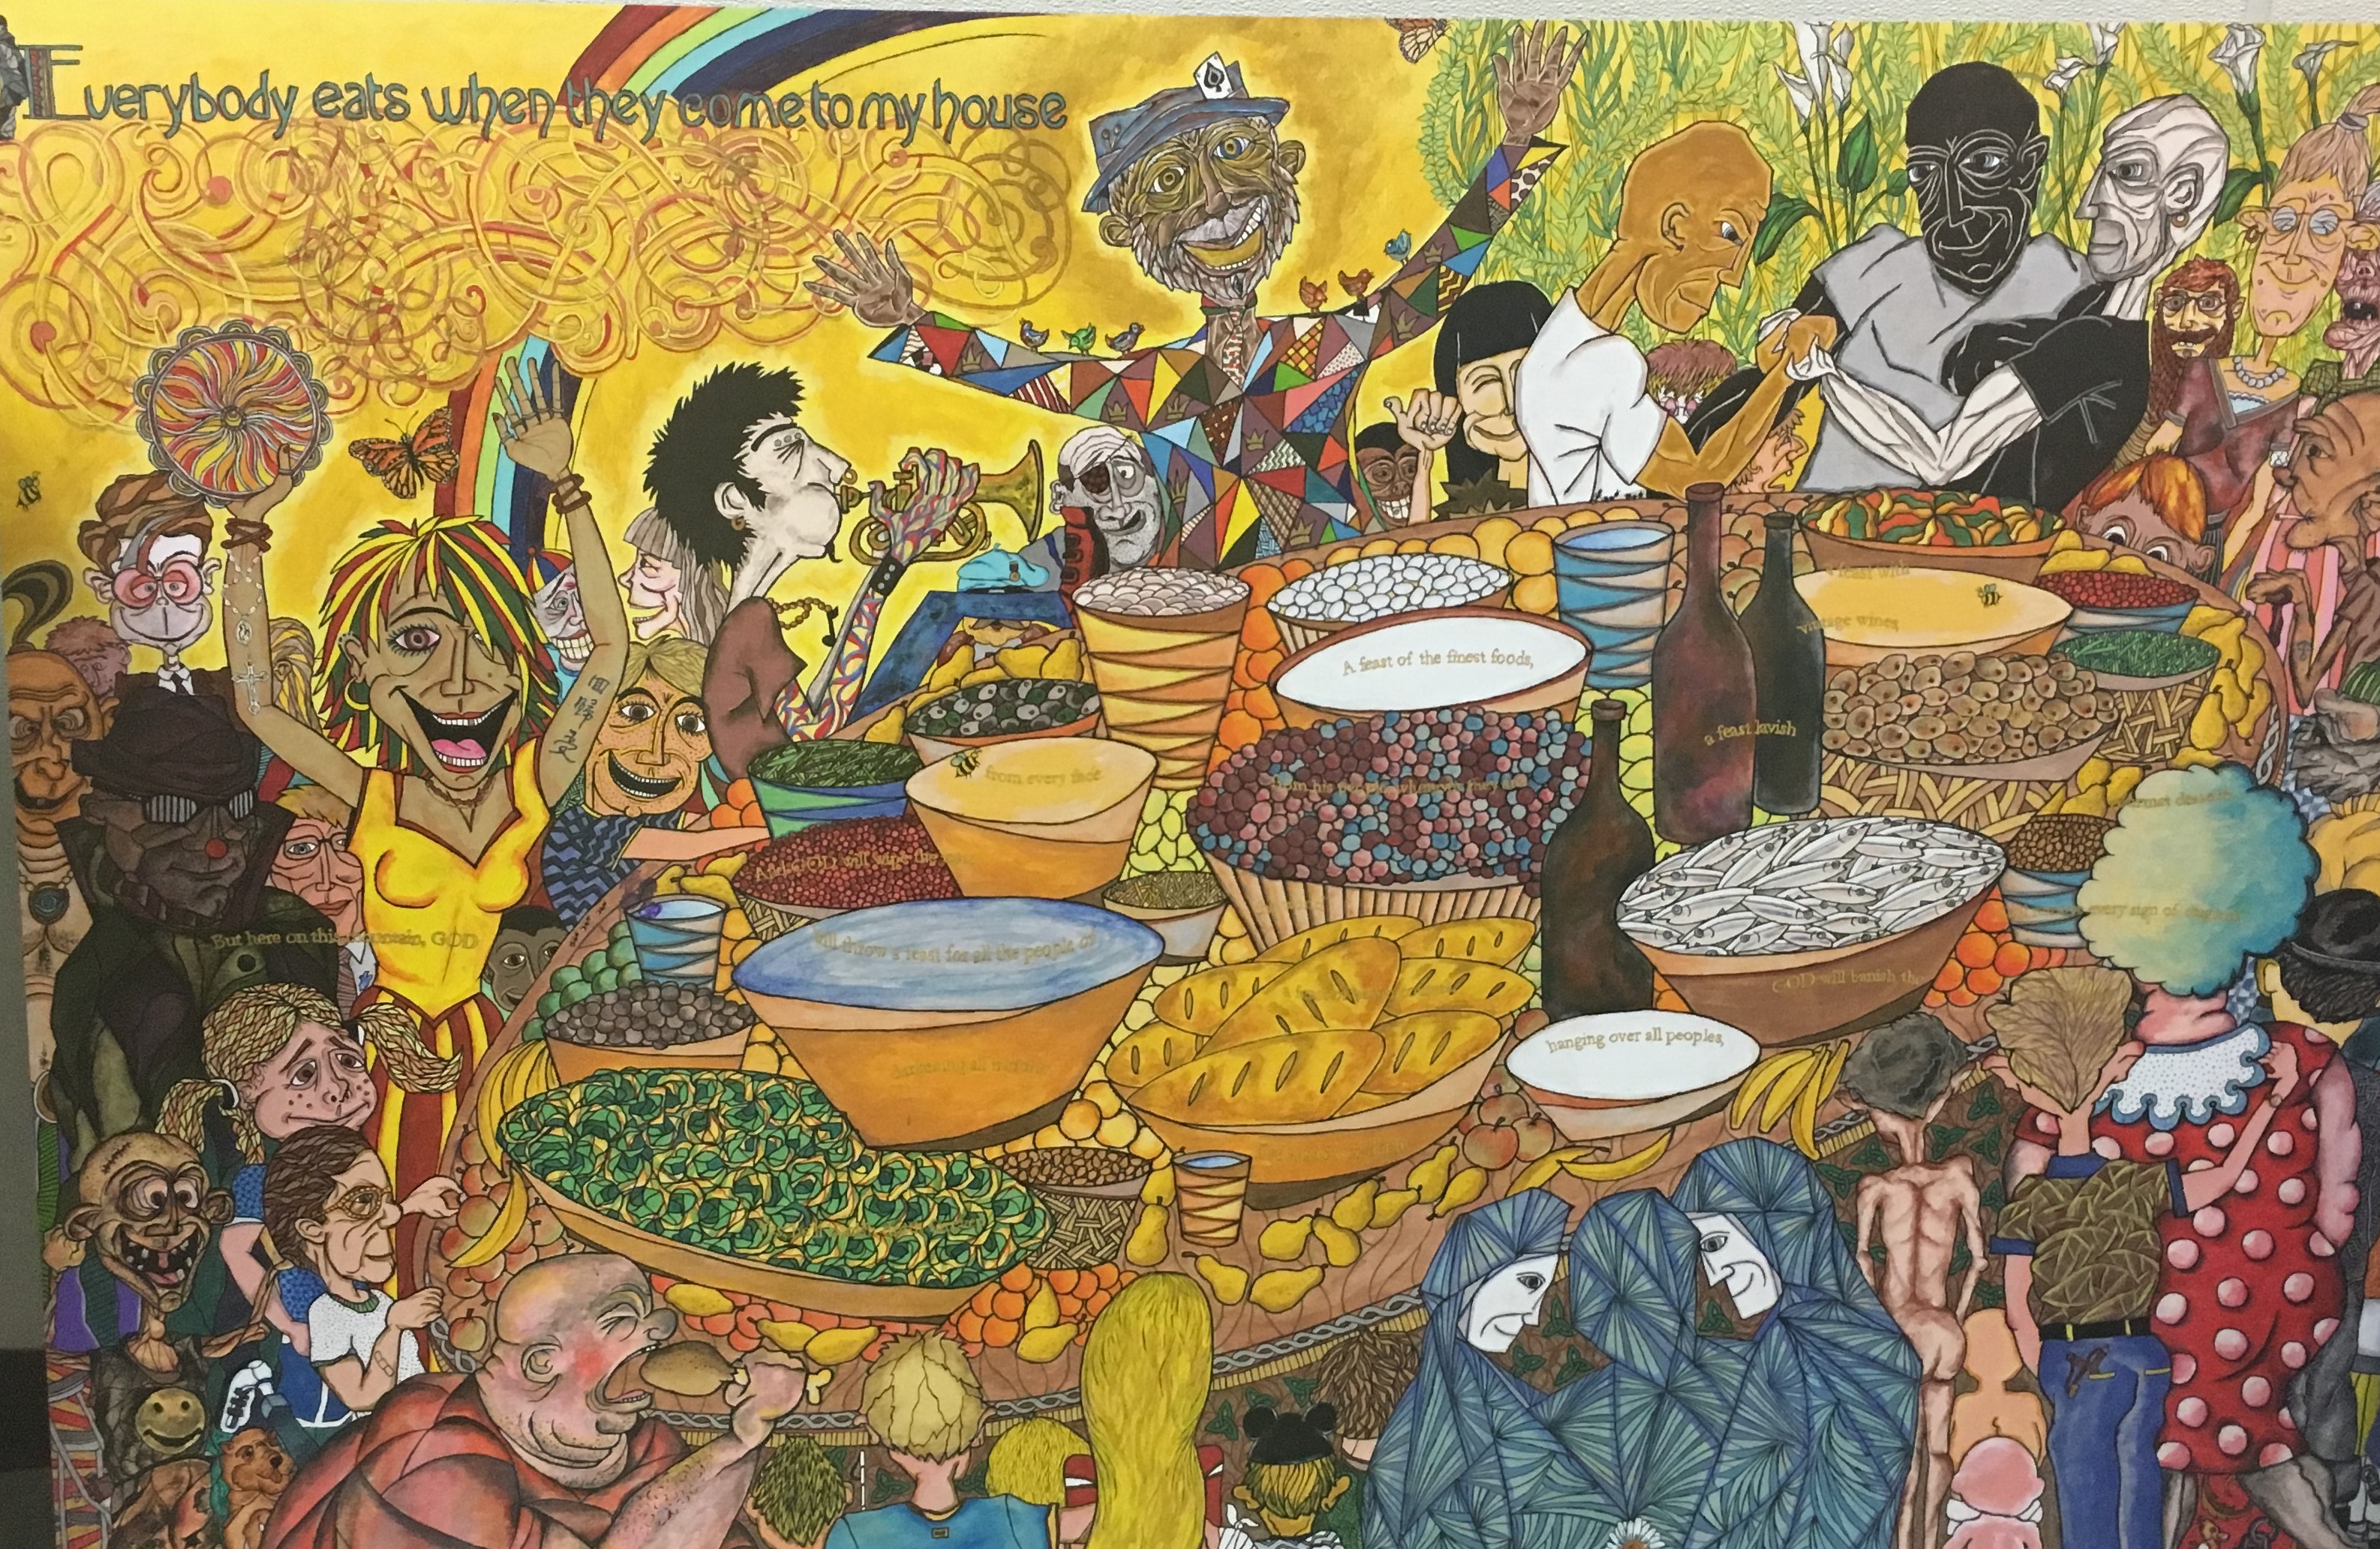 A photo of a painting that captions, "Everybody eats when they come to my house". The painting shows different groups of people gathered around a table of food.